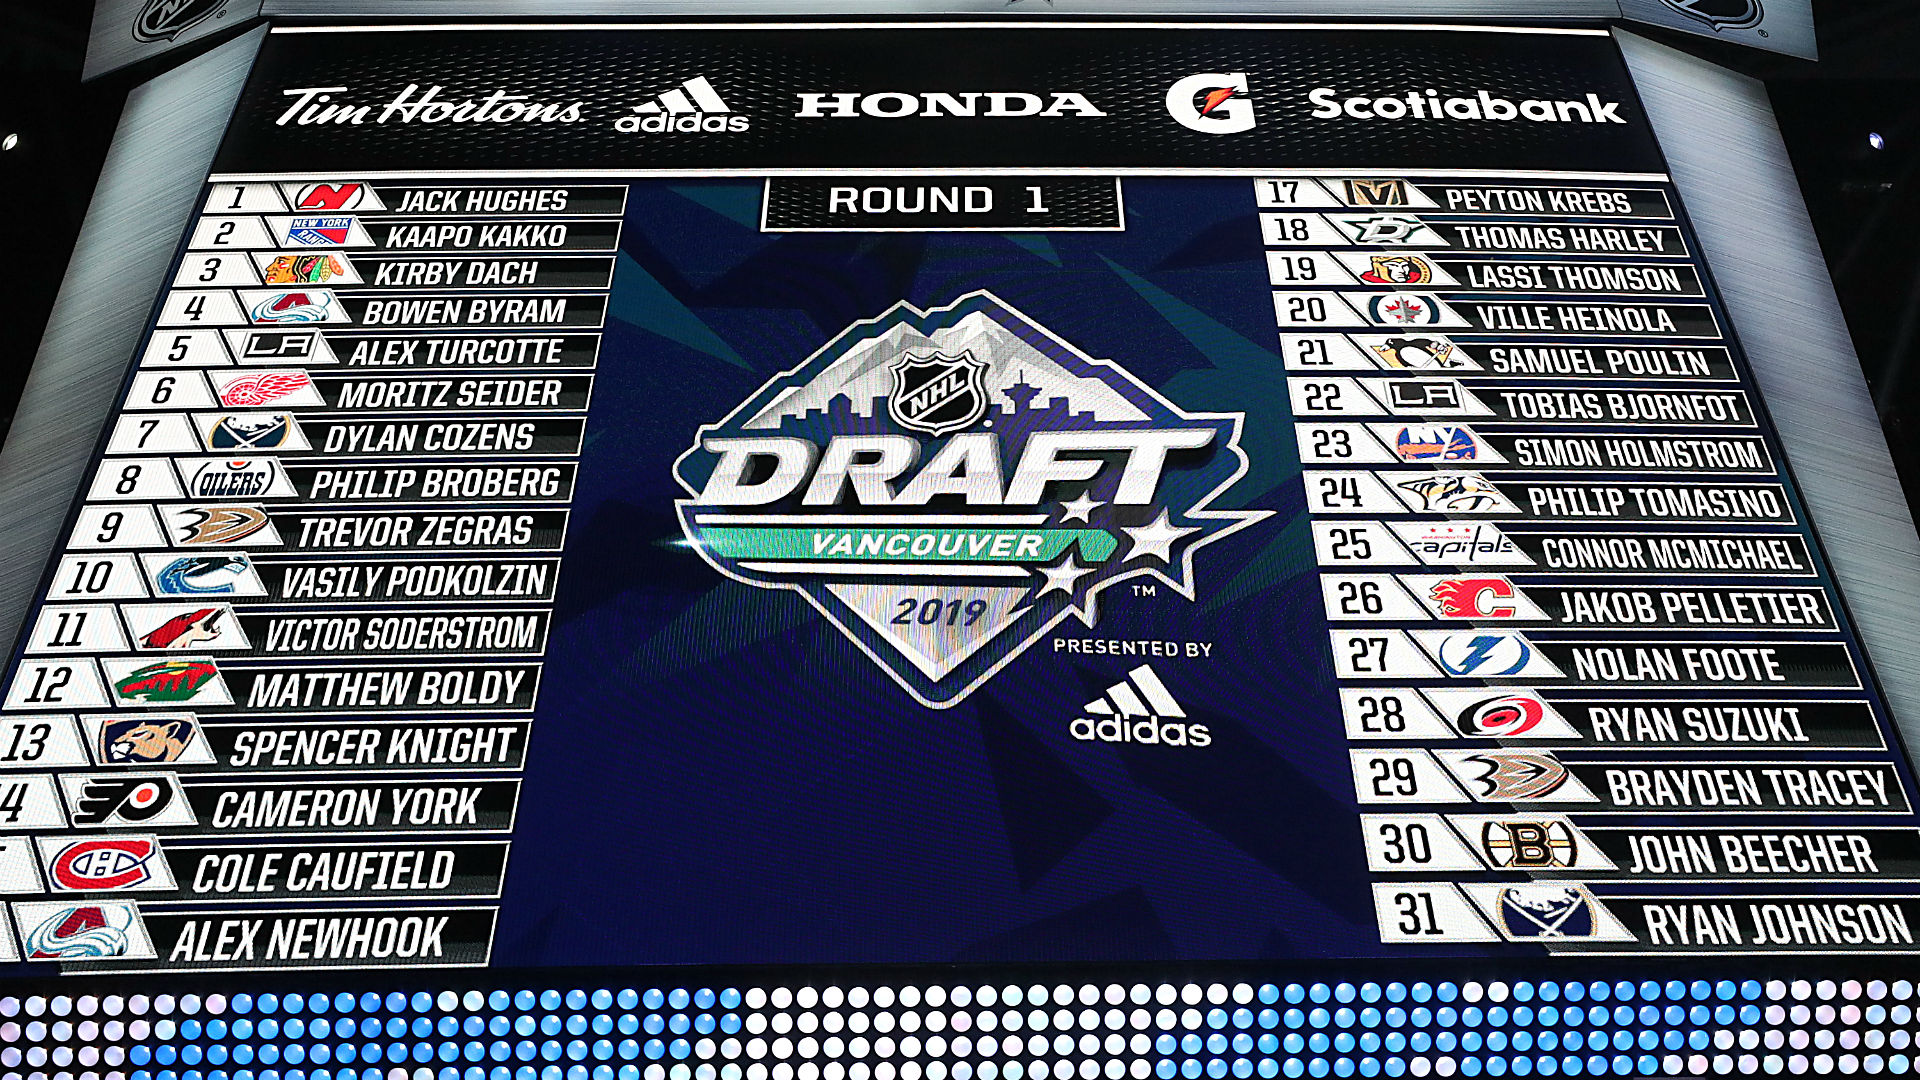 Flipboard NHL Draft results 2019 Grades, analysis for every pick in